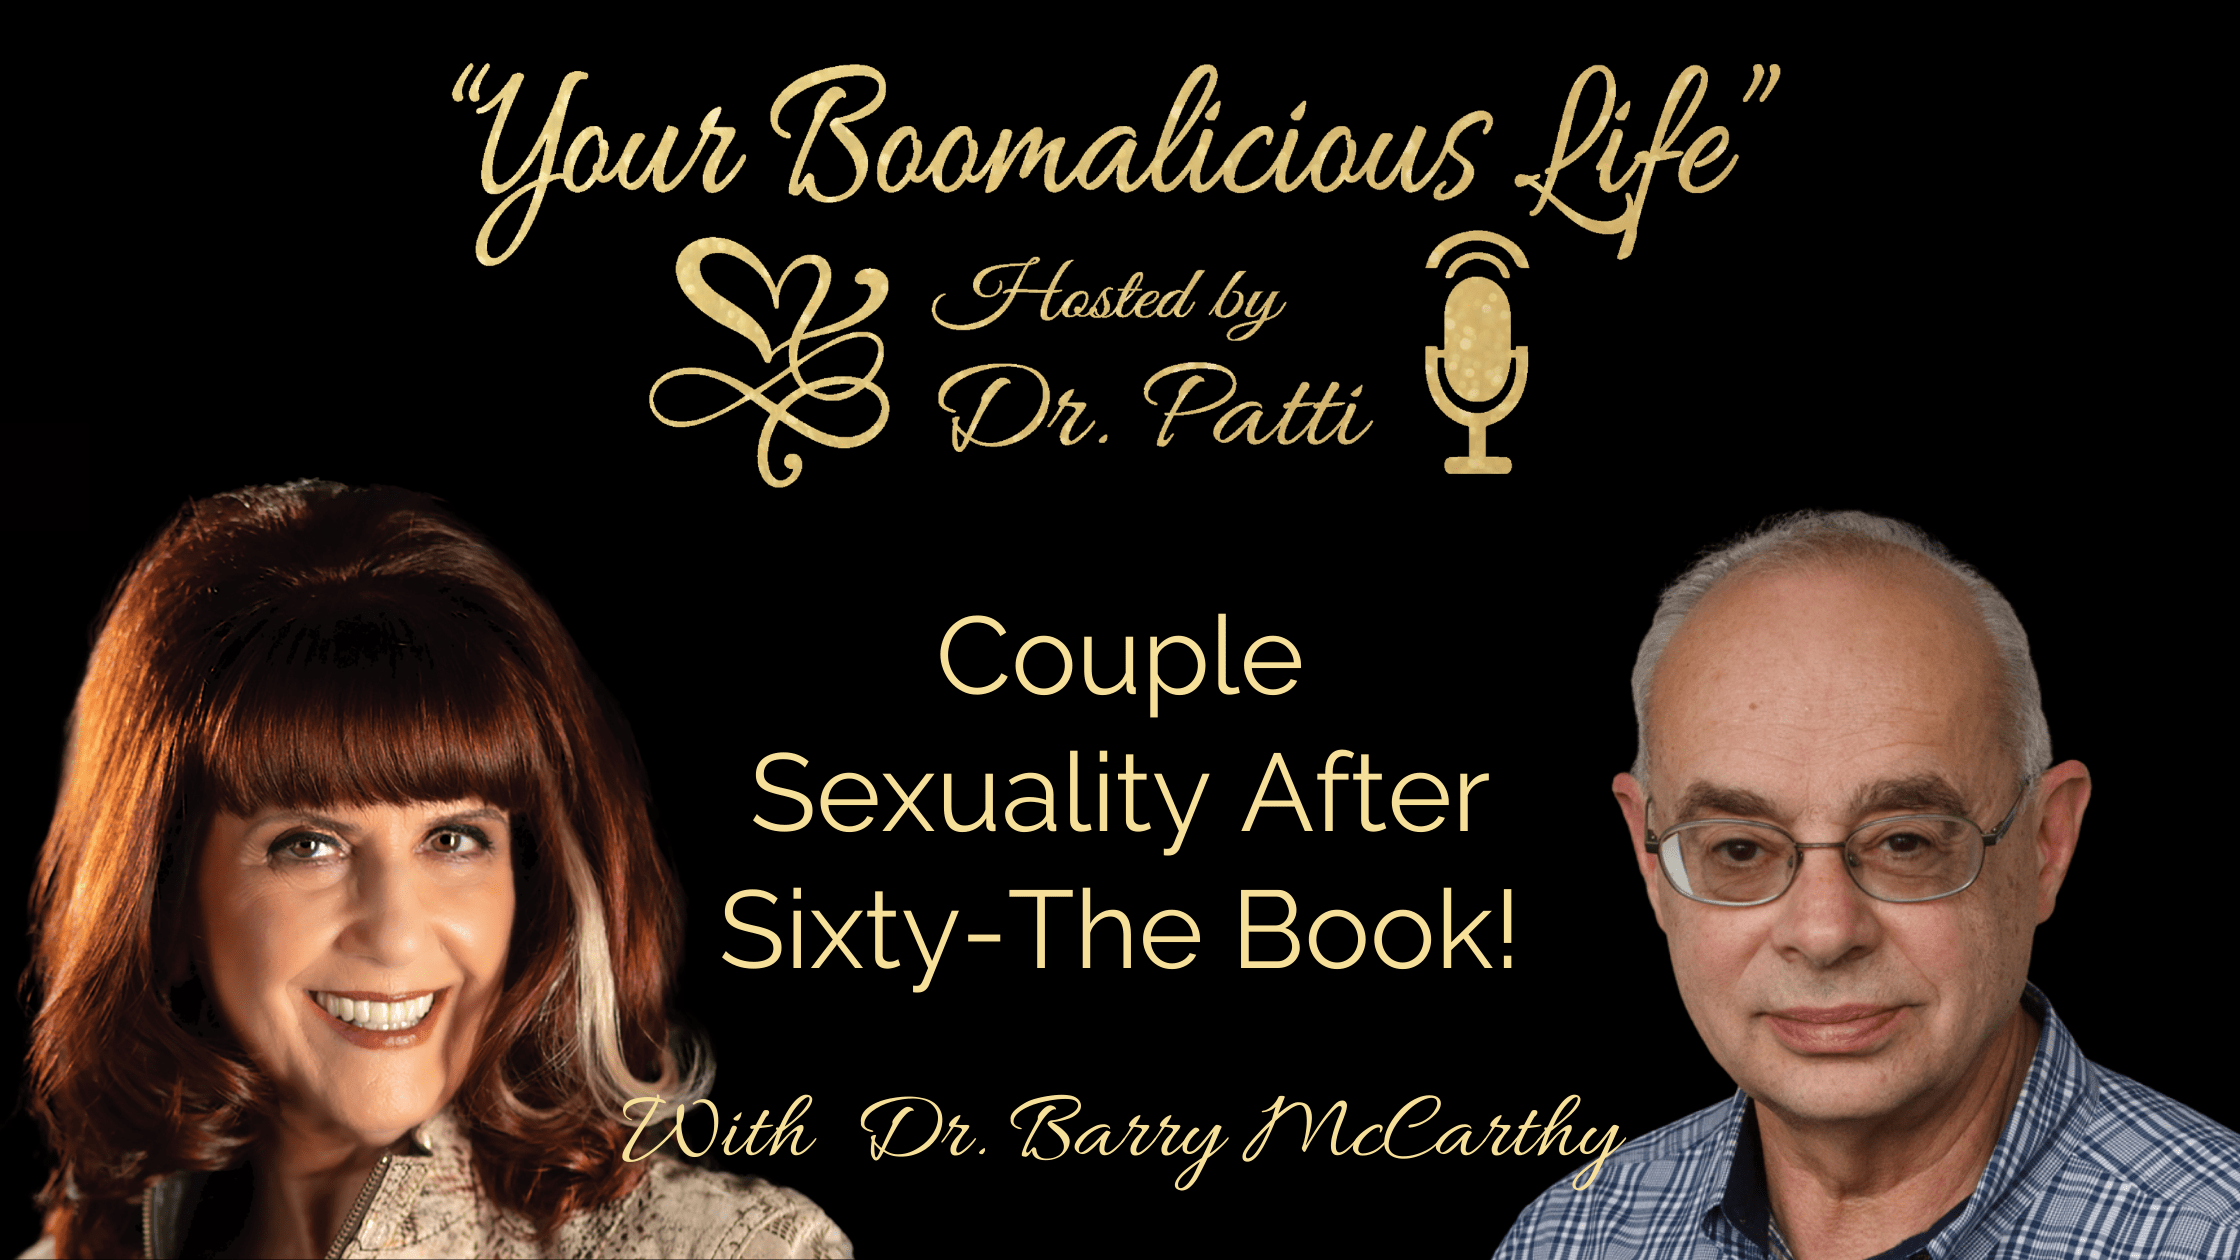 Episode 31: “Couple Sexuality After Sixty-The Book!”